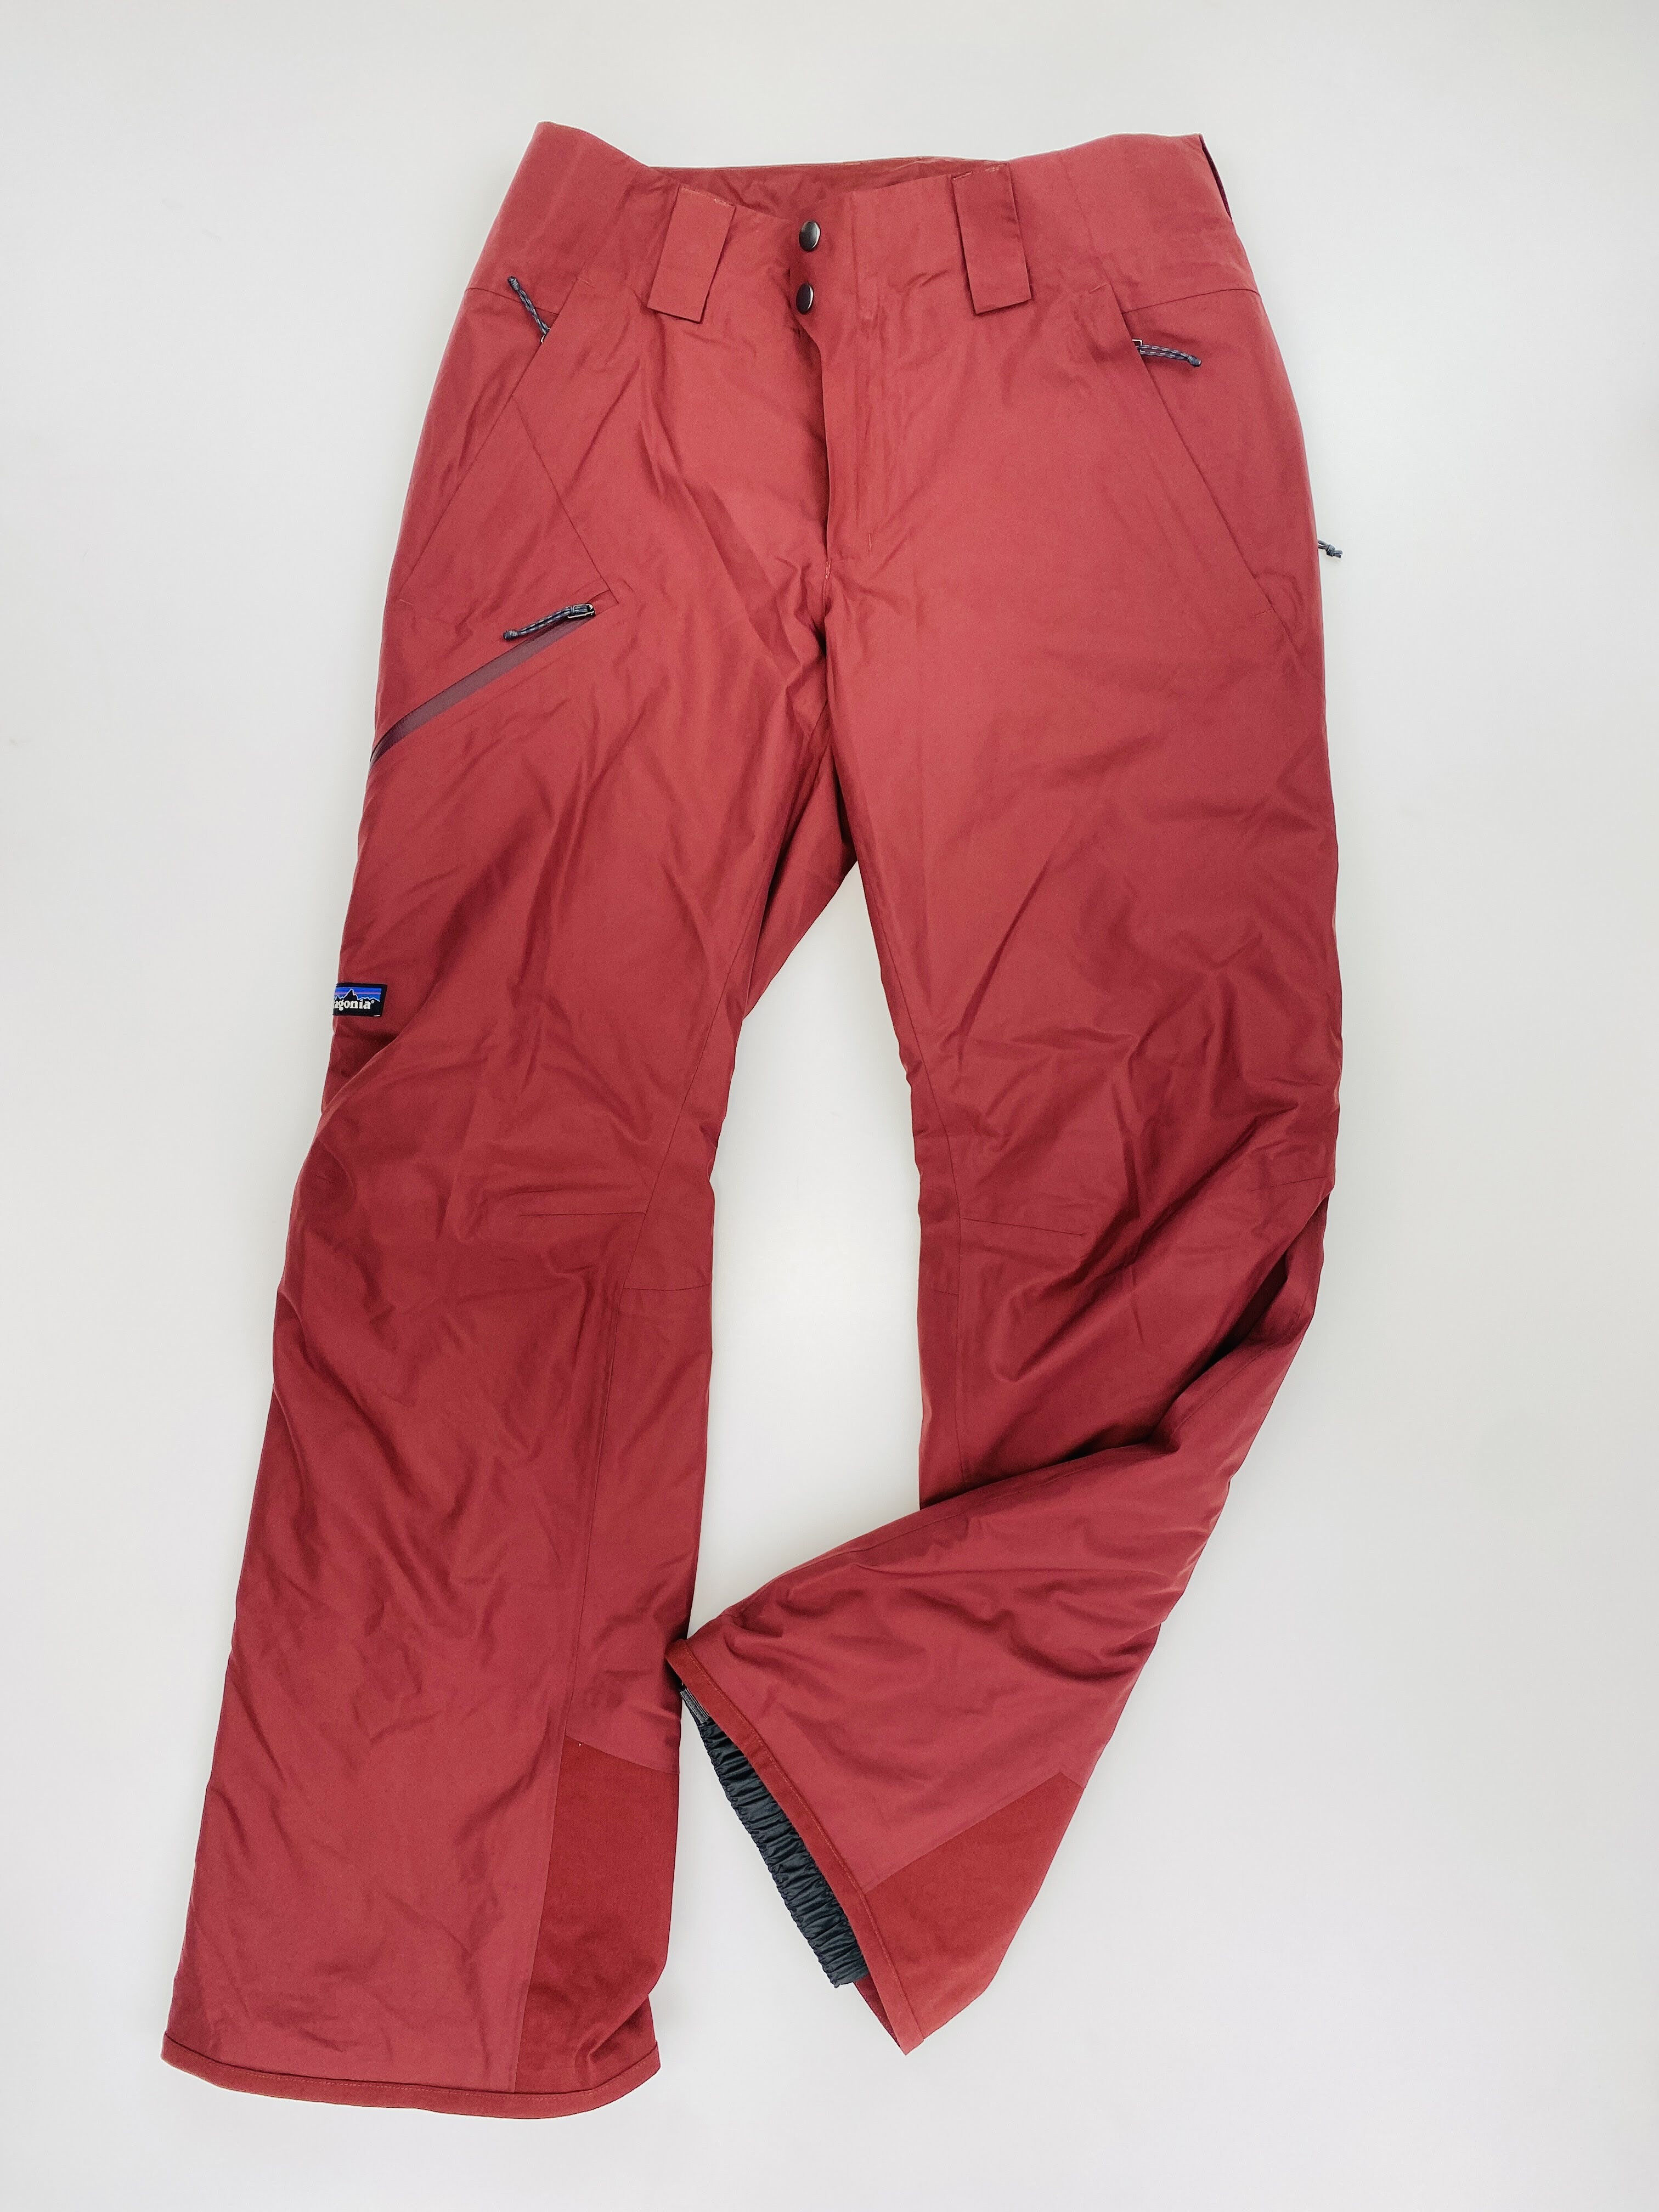 Patagonia W's Insulated Powder Town Pants - Reg - Second Hand Skihose - Damen - Rot - S | Hardloop